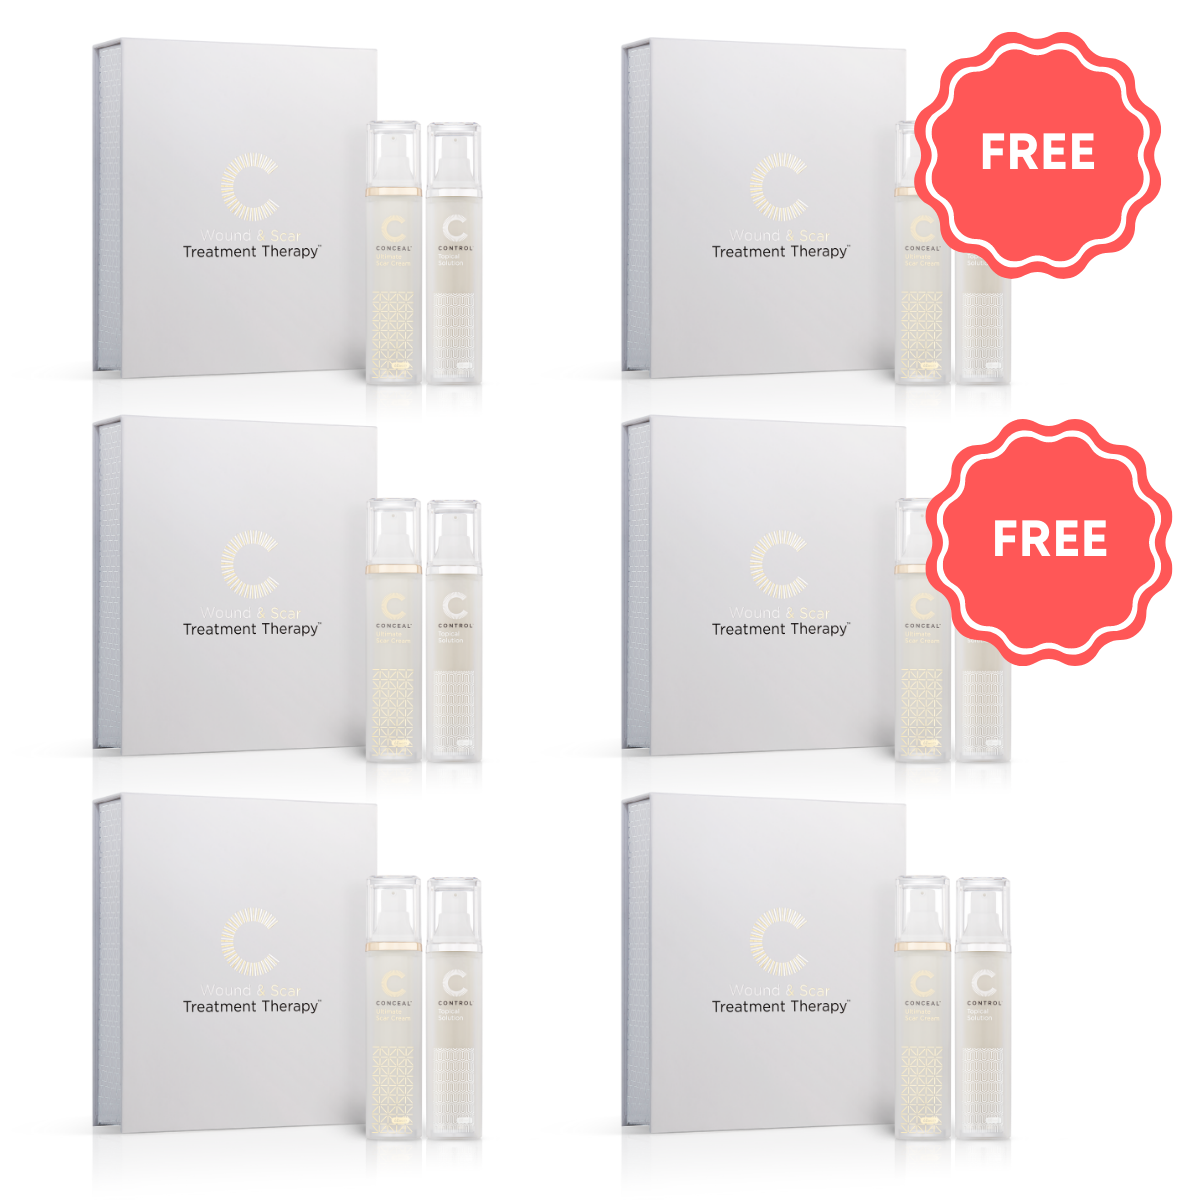 Wound & Scar Treatment Therapy™ - Buy 4 Get 2 Free!